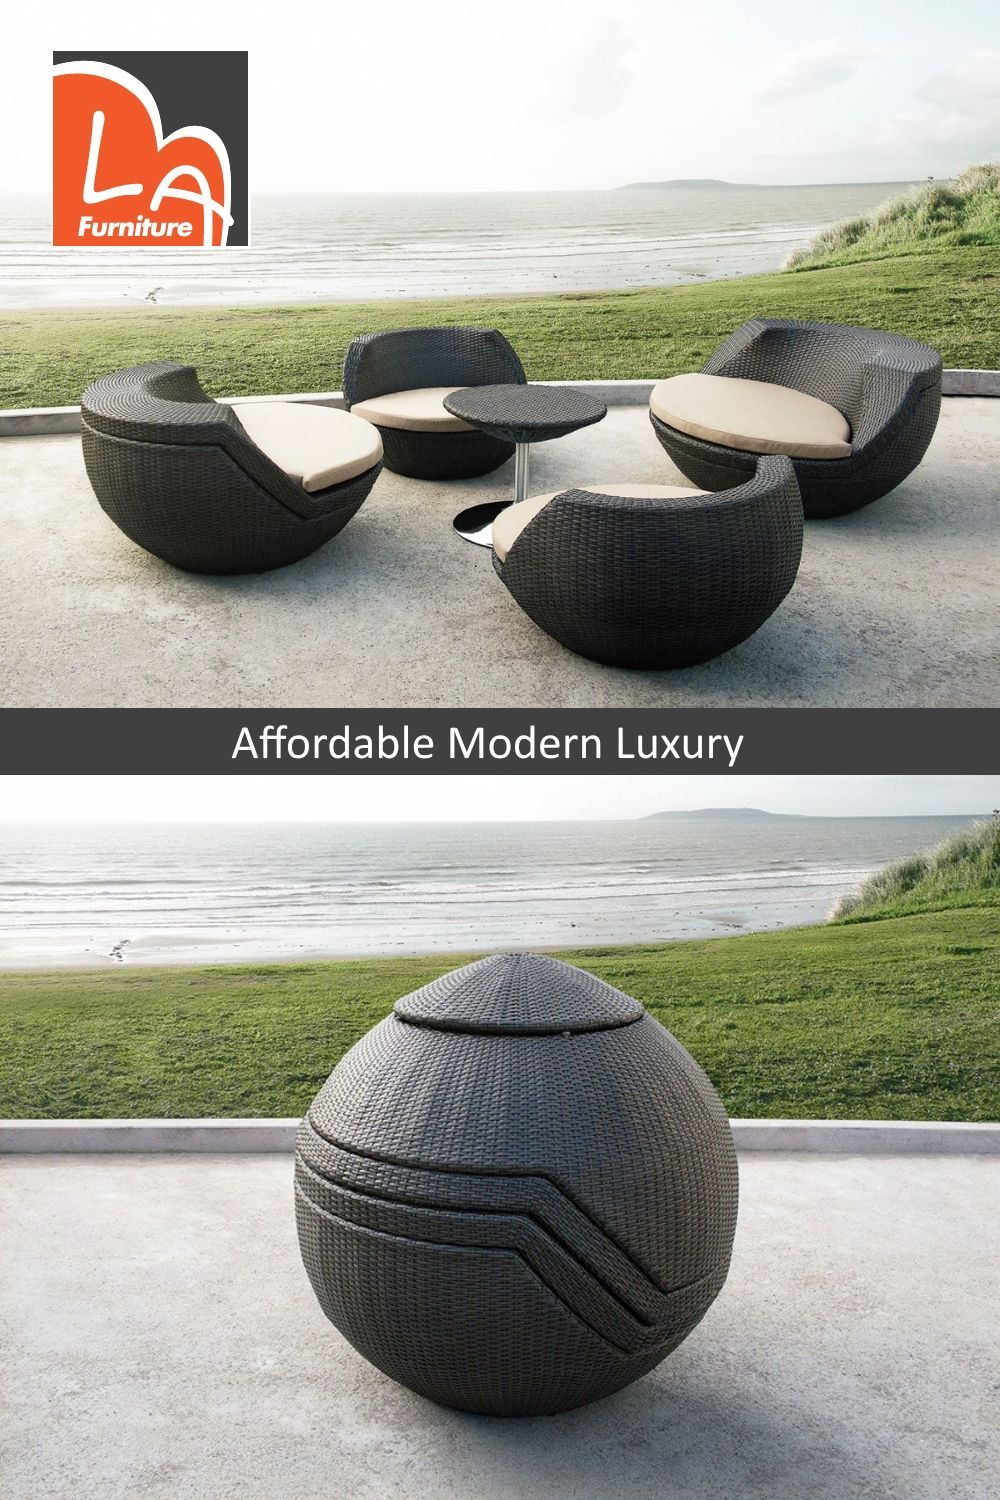 Ovum Modern Brown 5 Piece Egg Shaped Wicker Patio Set. Features rounded modern seat design, fabric padded seat cushion, and a